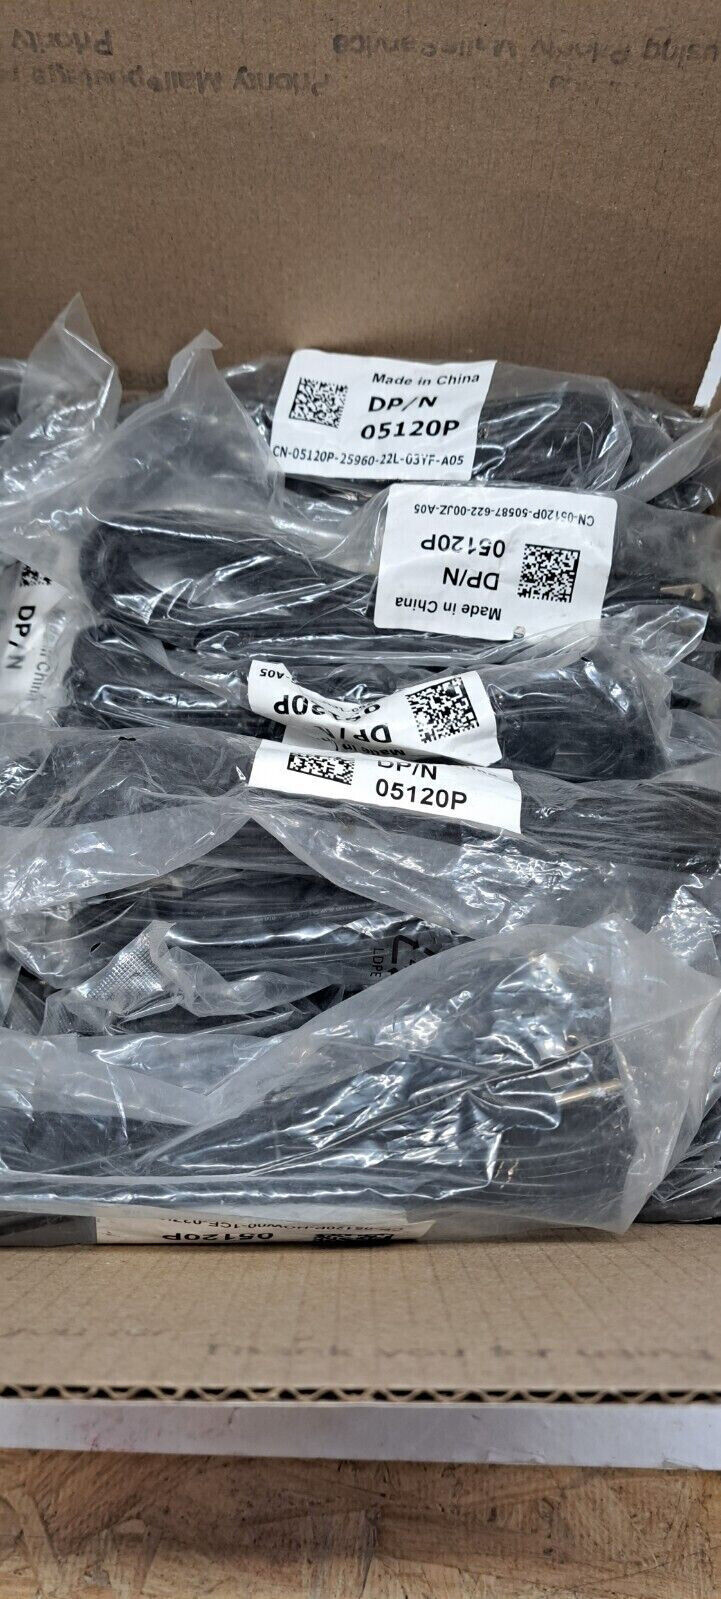 Lot of 50 New Dell DP/N 05120P 6ft AC 3-Prong Black Power Cables 10A 125V 5120P